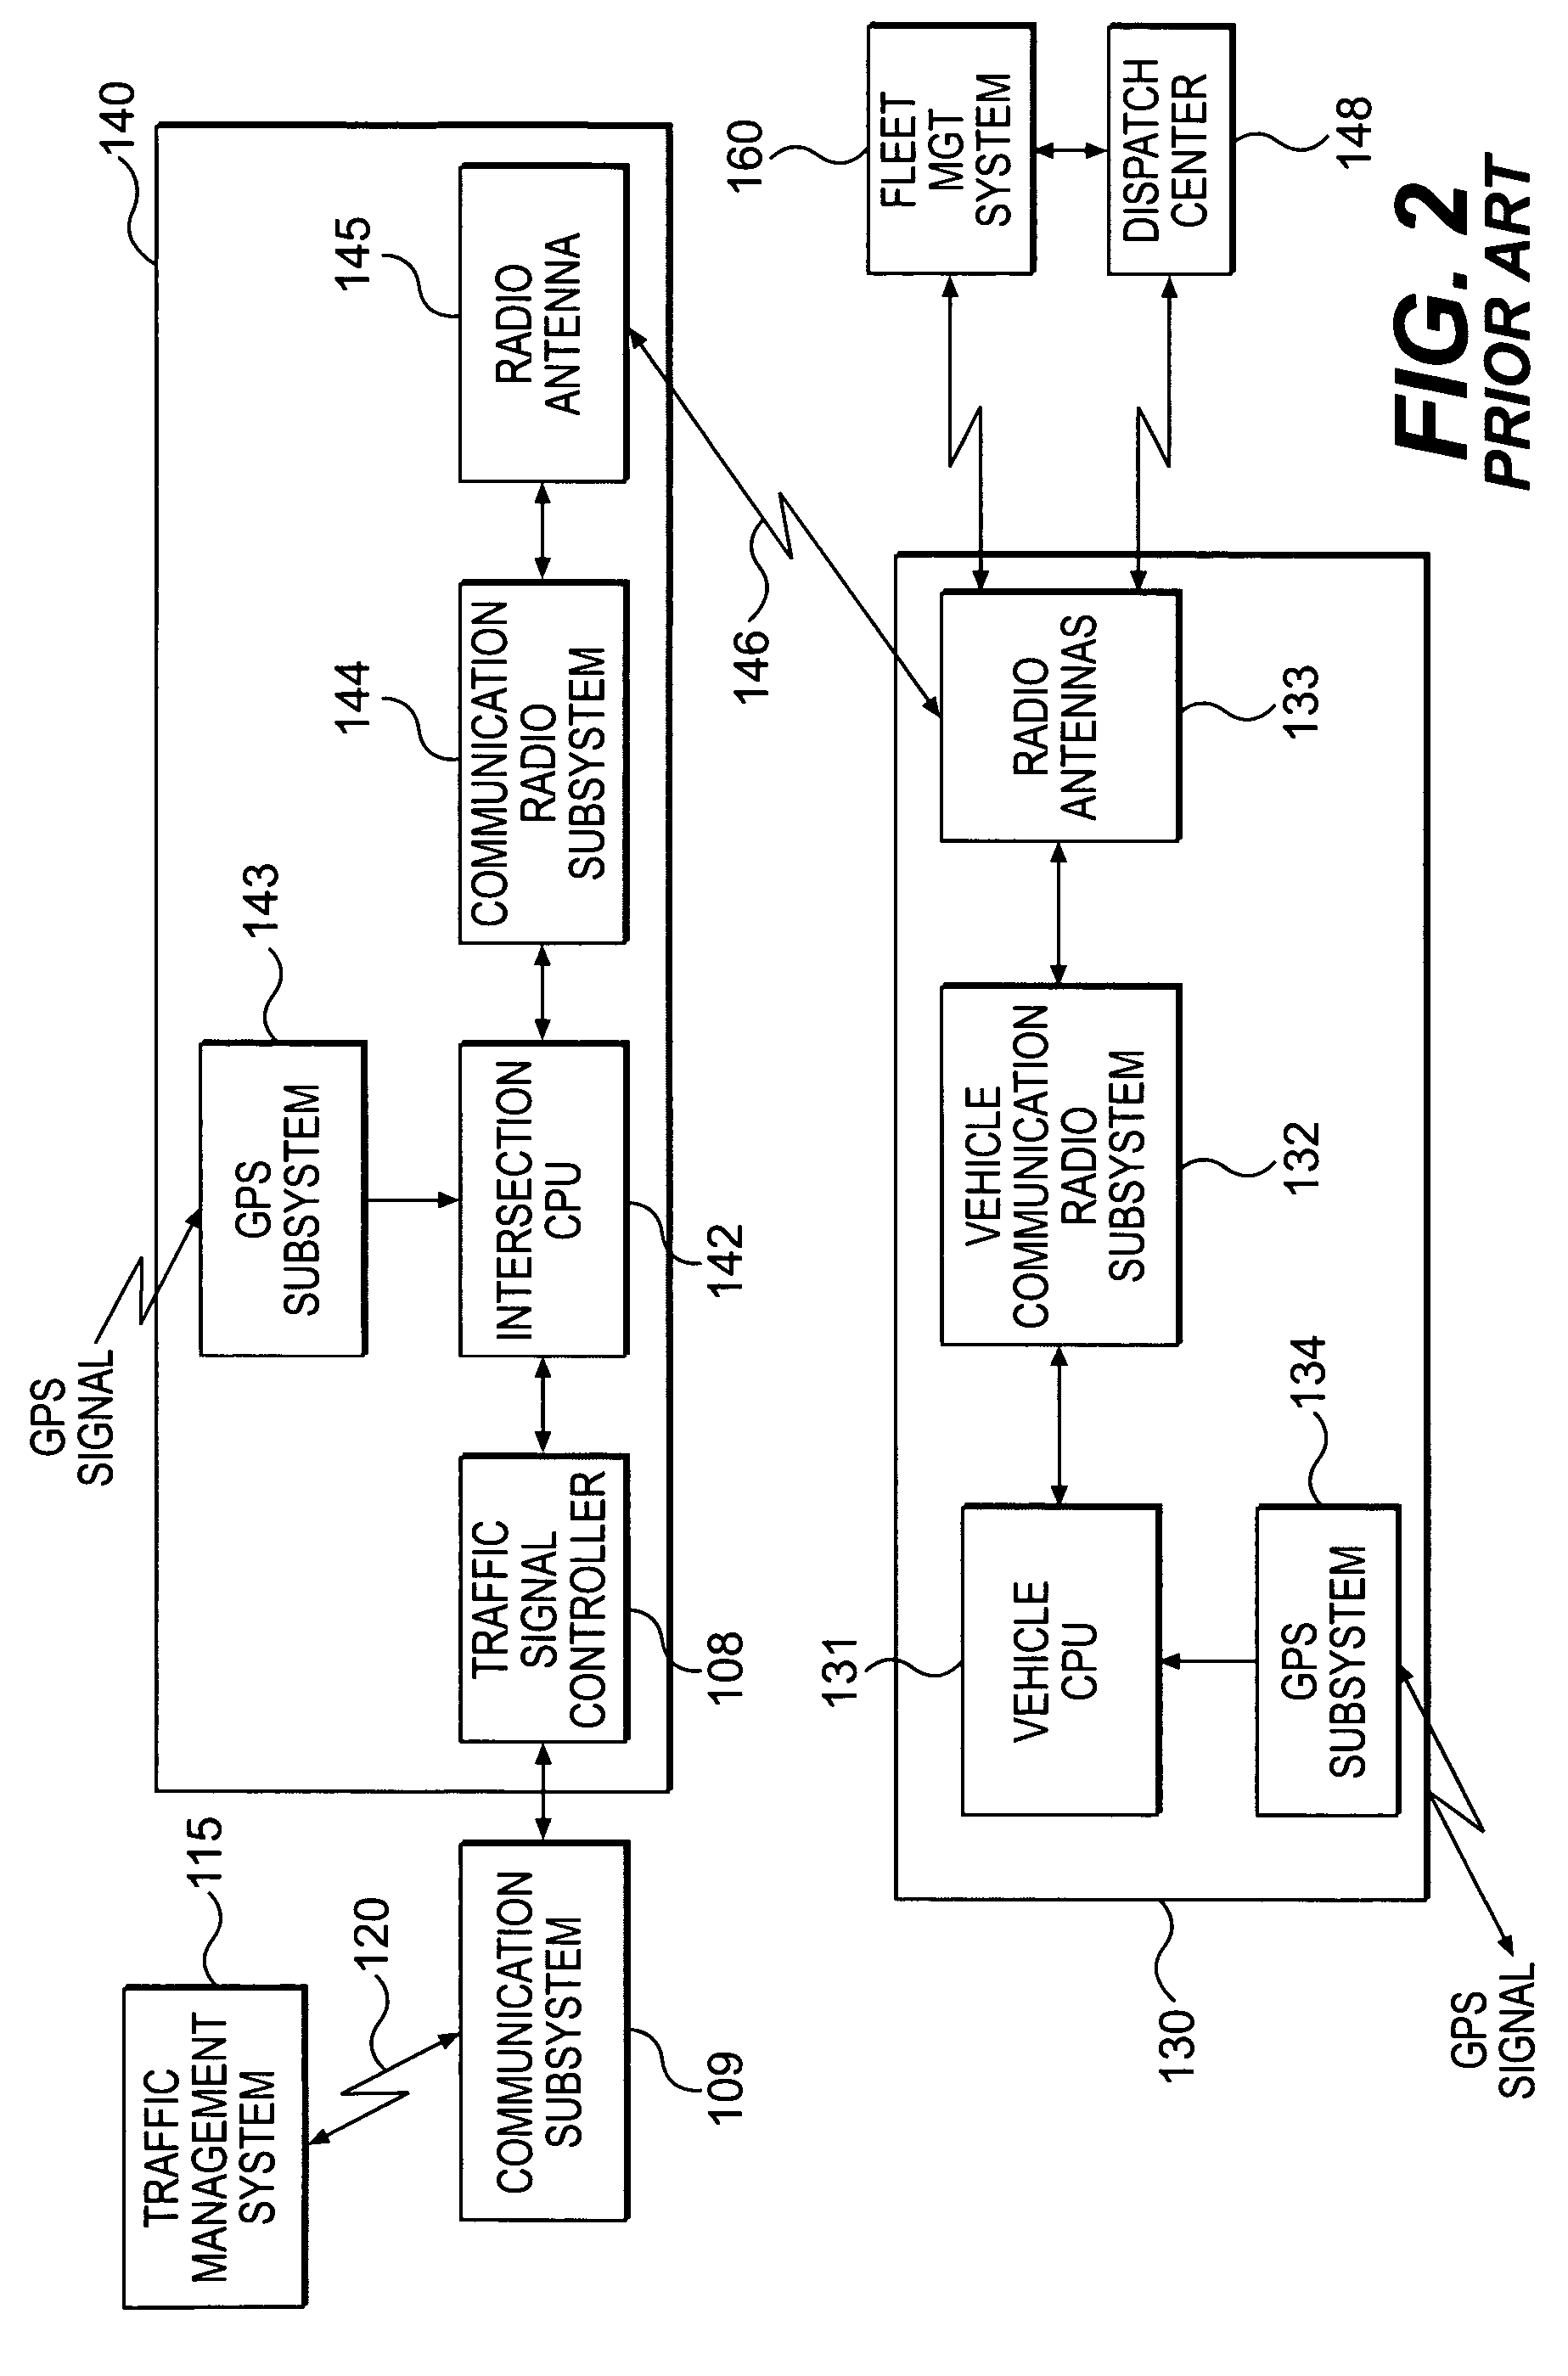 Centralized traffic signal preemption system and method of use